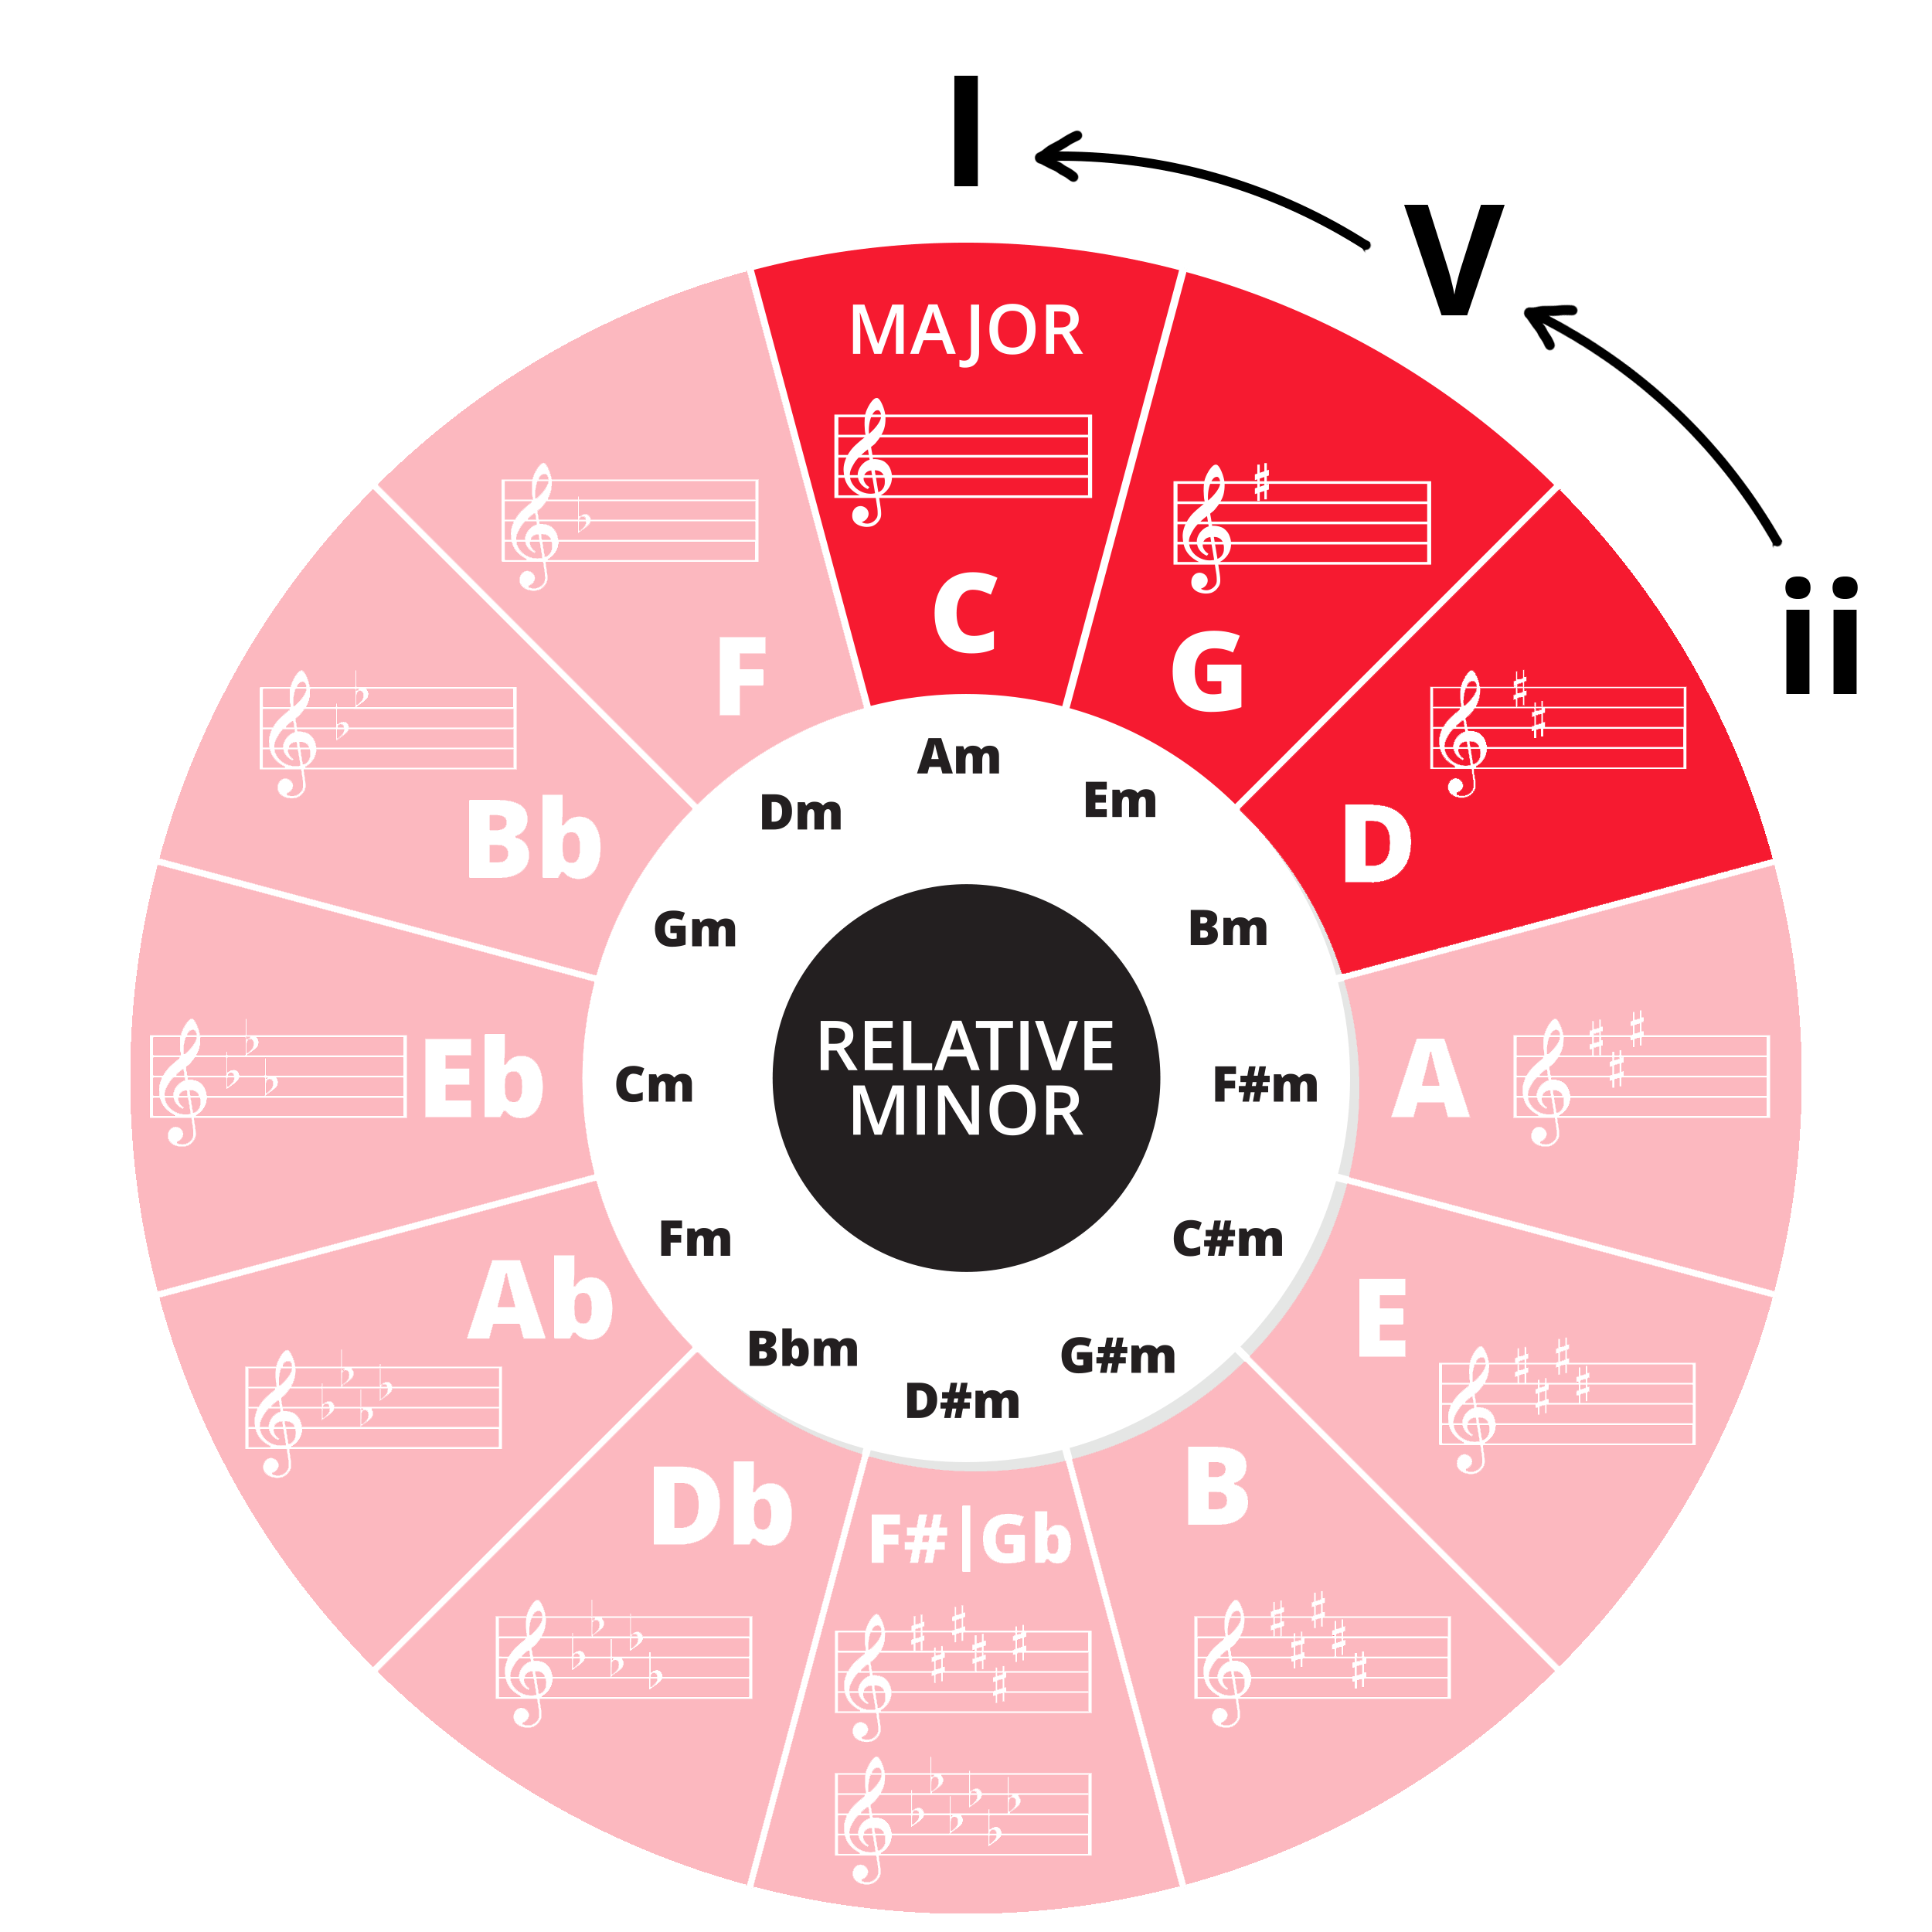 Circle of Fifths in pink with D, C and G in red. V with arrow going to ii then arrow going to I above D, G, and C respectively.